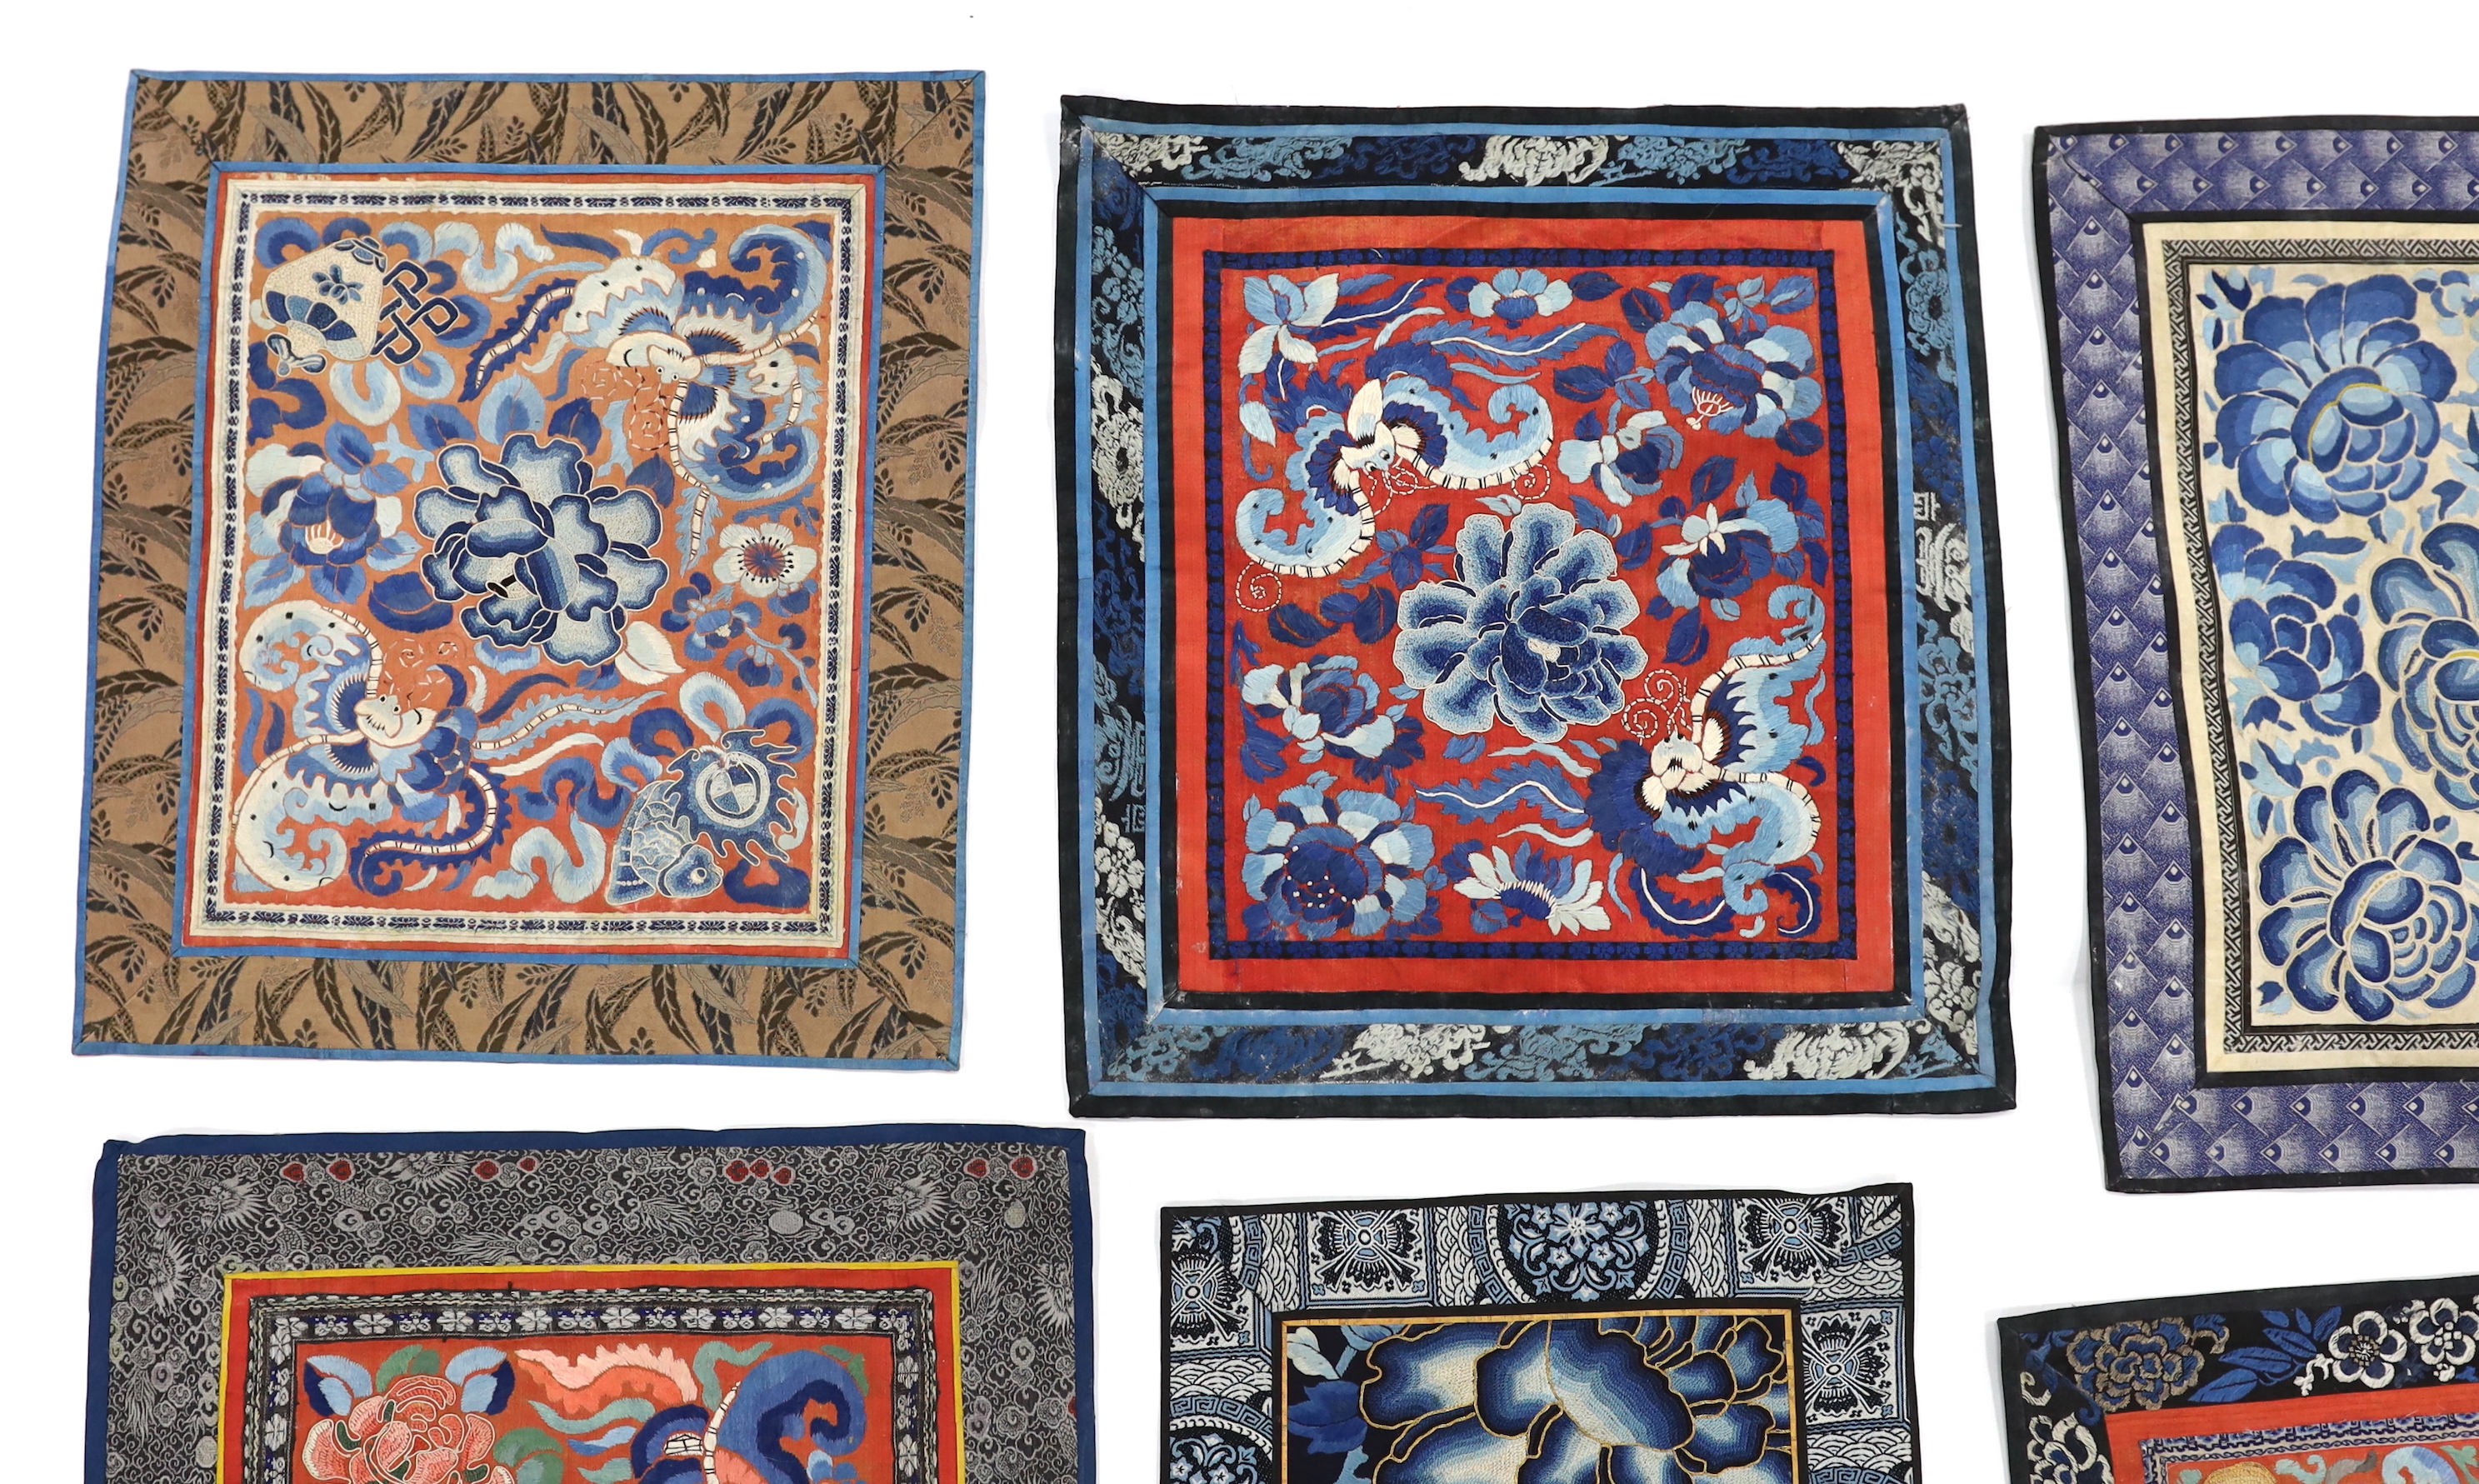 Six large Chinese silk embroidery mats with silk brocade borders, mostly embroidered flowers and butterflies in stem stitch and Beijing knot, largest 44.5cm x 37cm